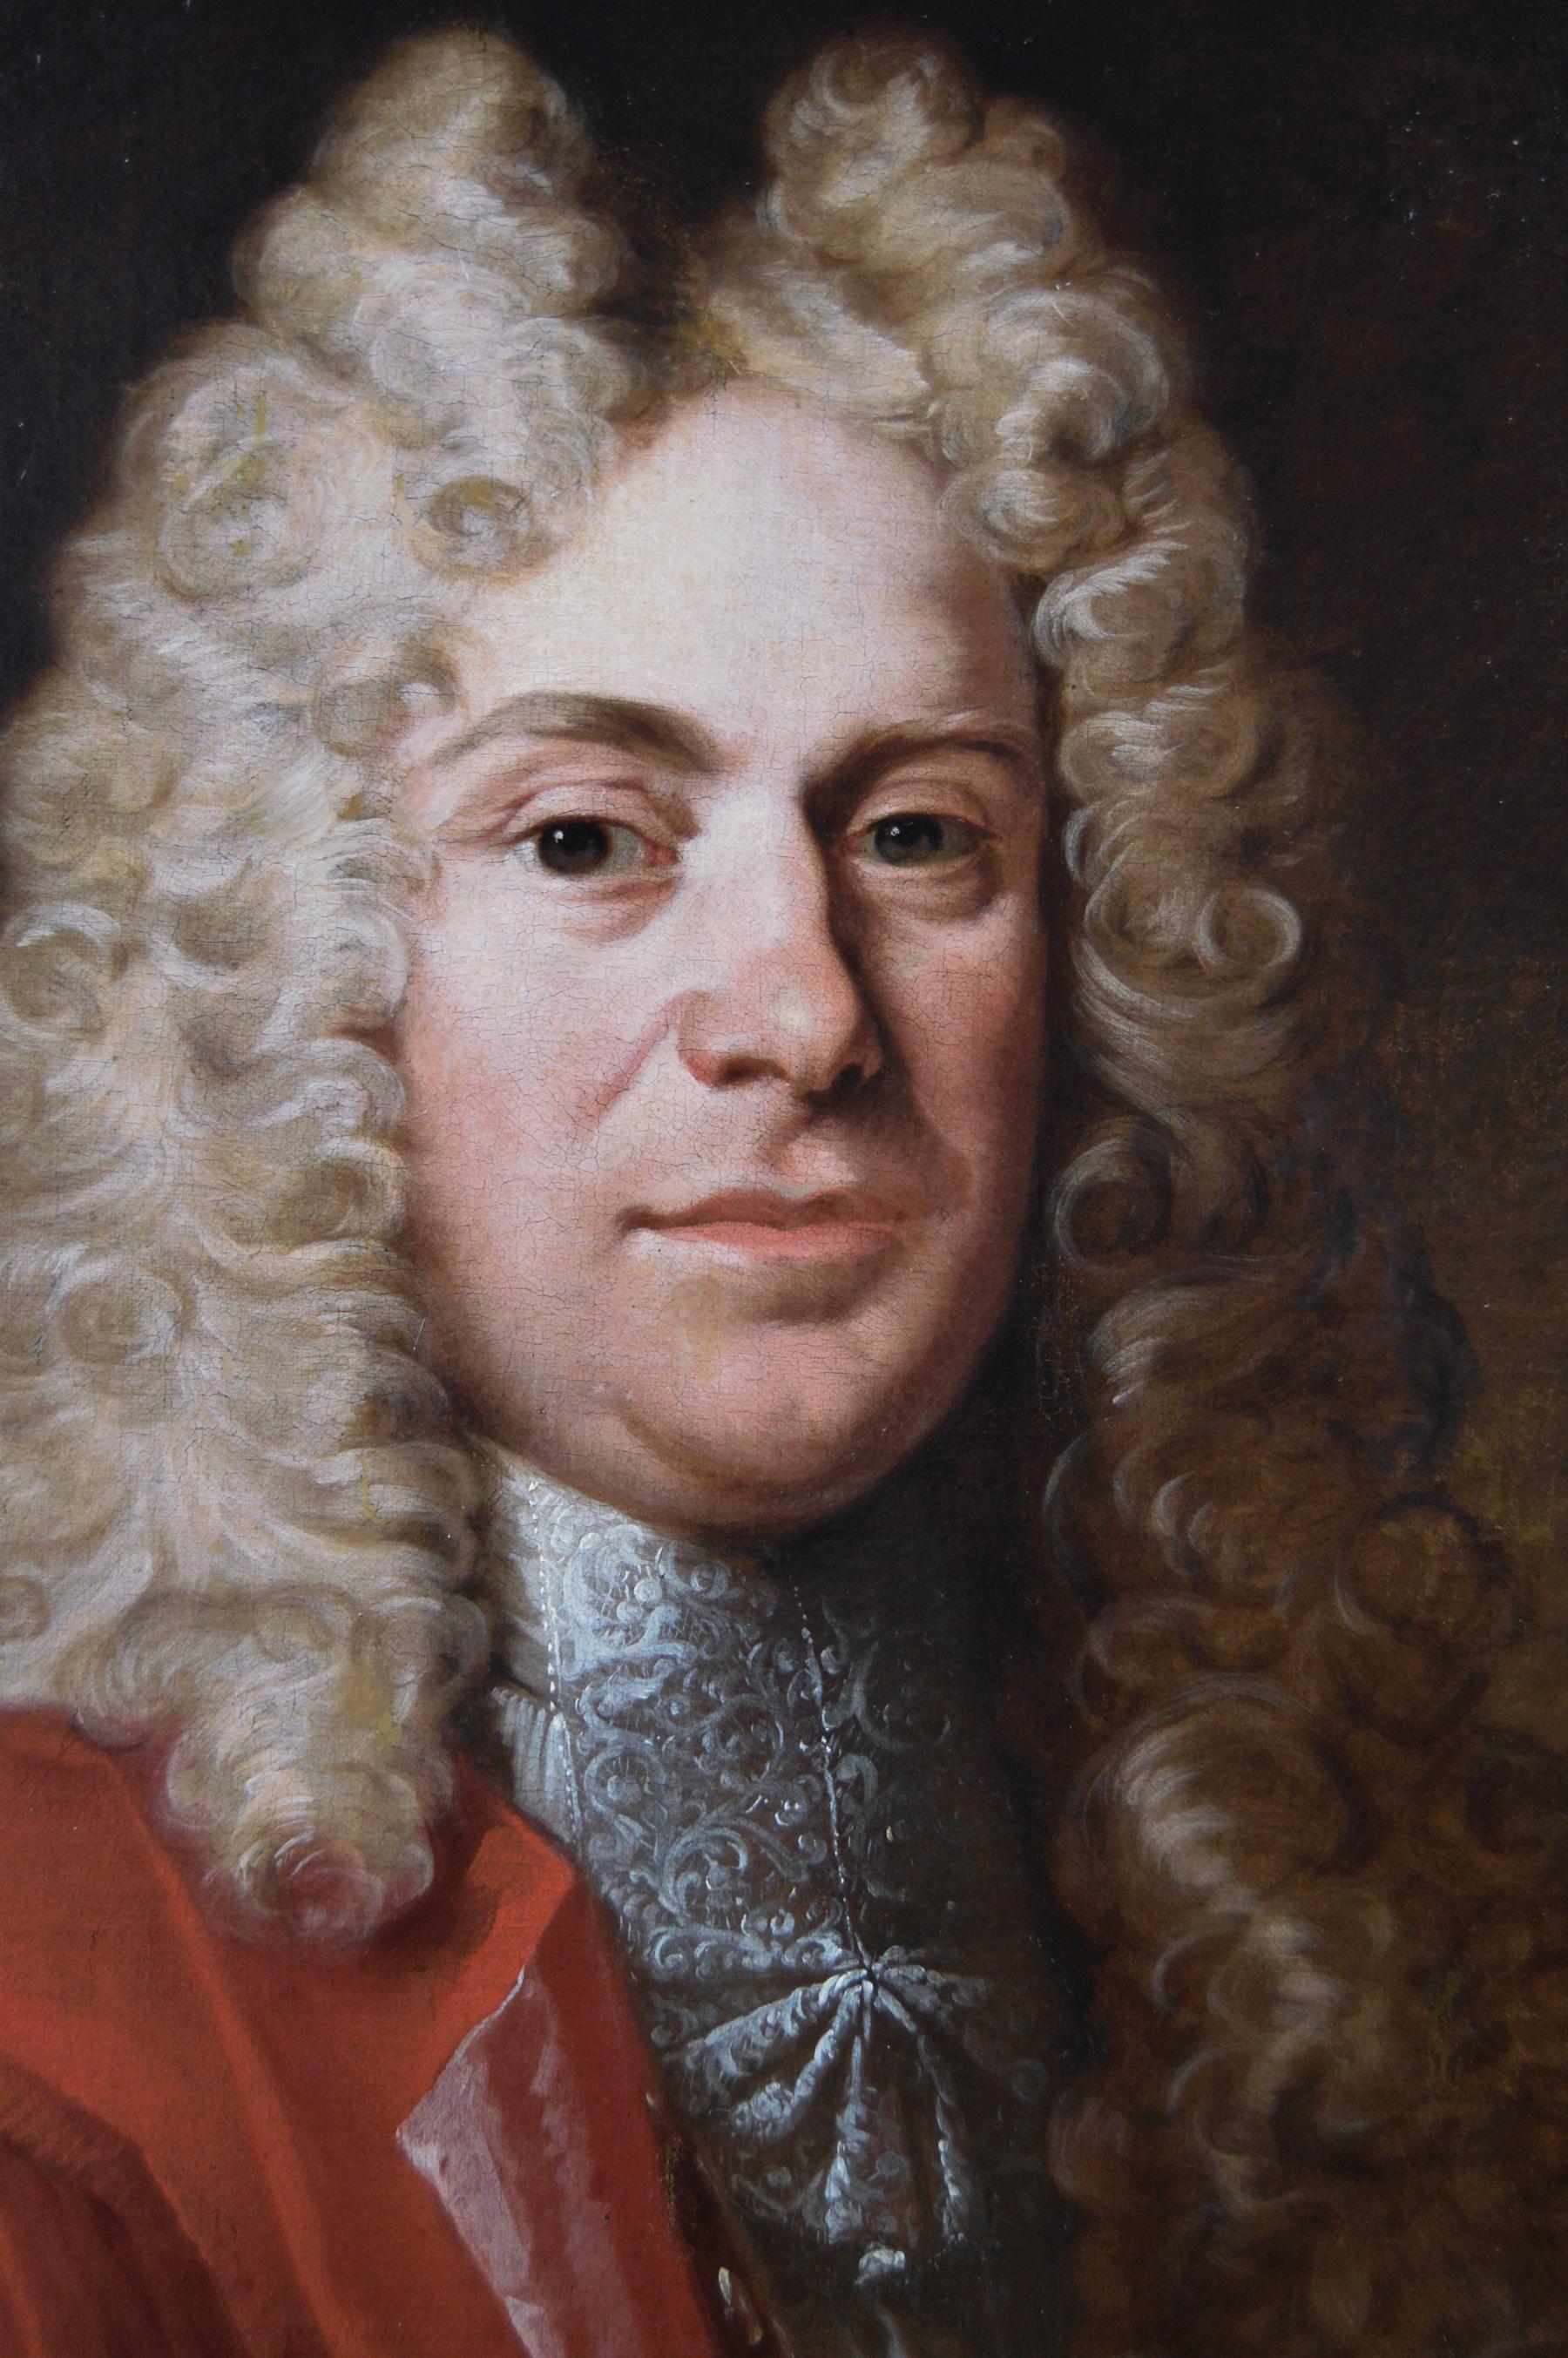 who was the duke of york in 1664